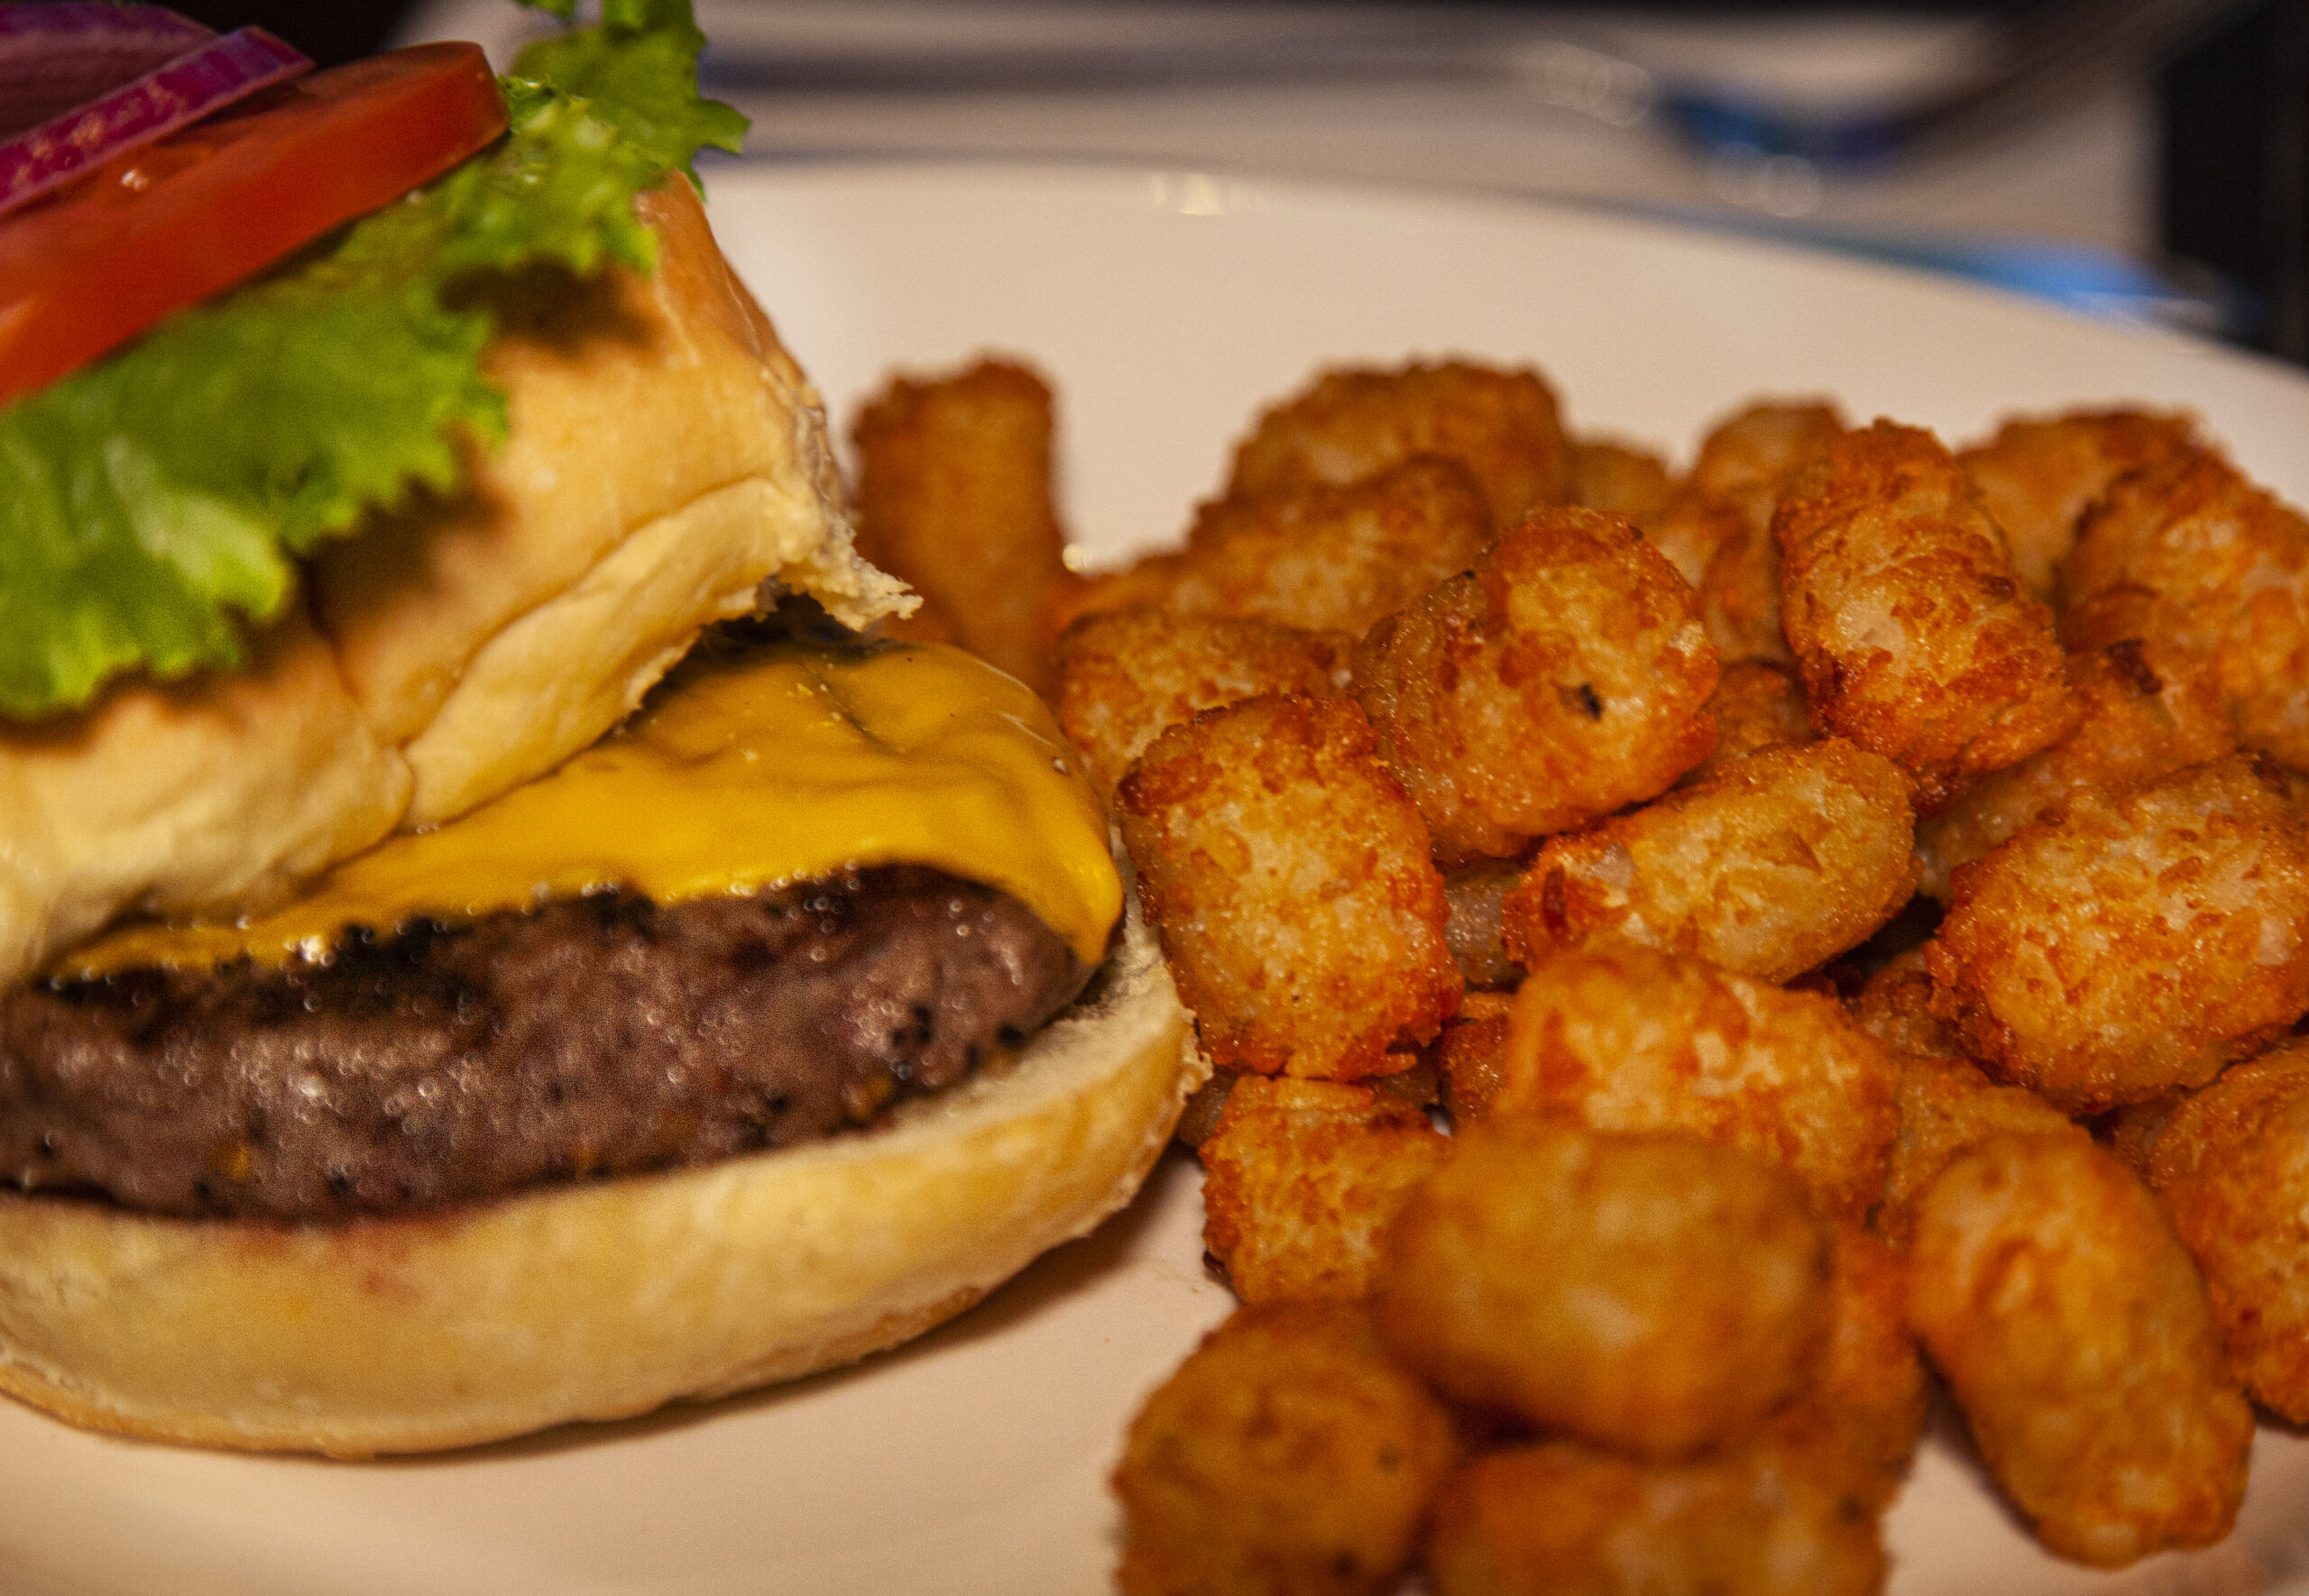 a close-up photo of a cheeseburger and tater tots on a white plate